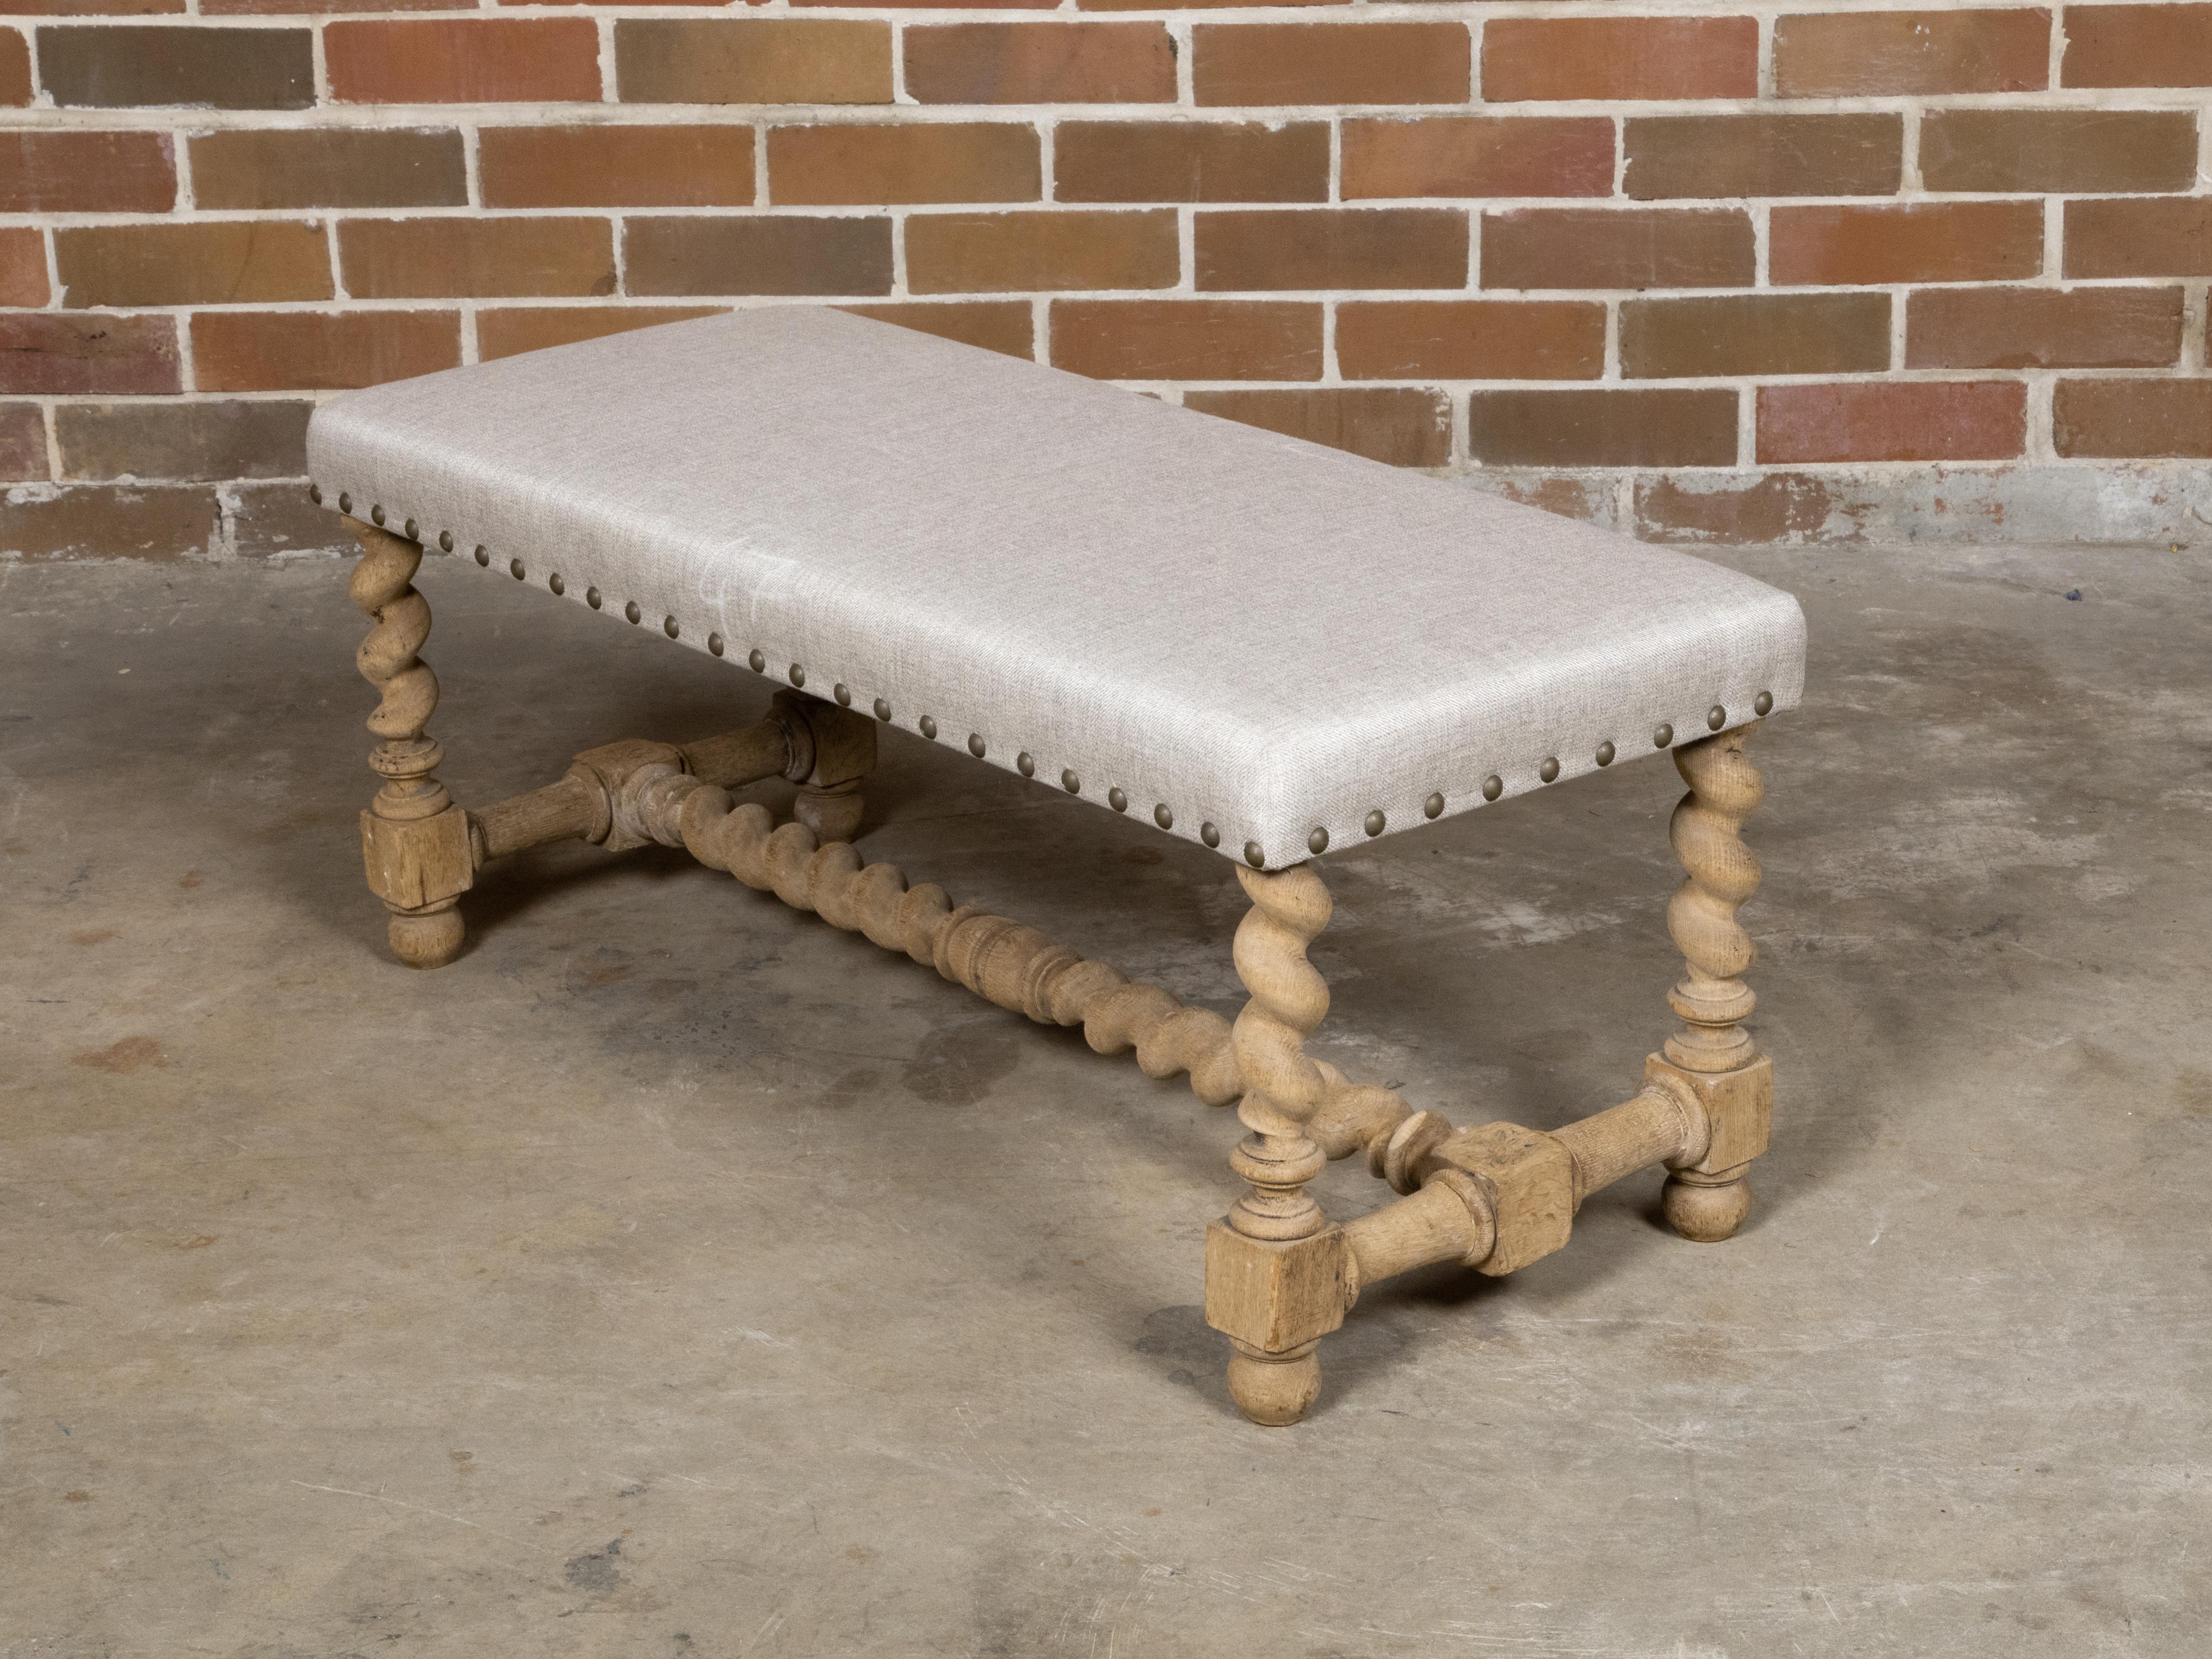 An English bleached wood bench from circa 1900 with barley twist base and custom linen upholstery. This exquisite English bleached wood bench, hailing from circa 1900, captures the timeless elegance of the era with its unique barley twist base and